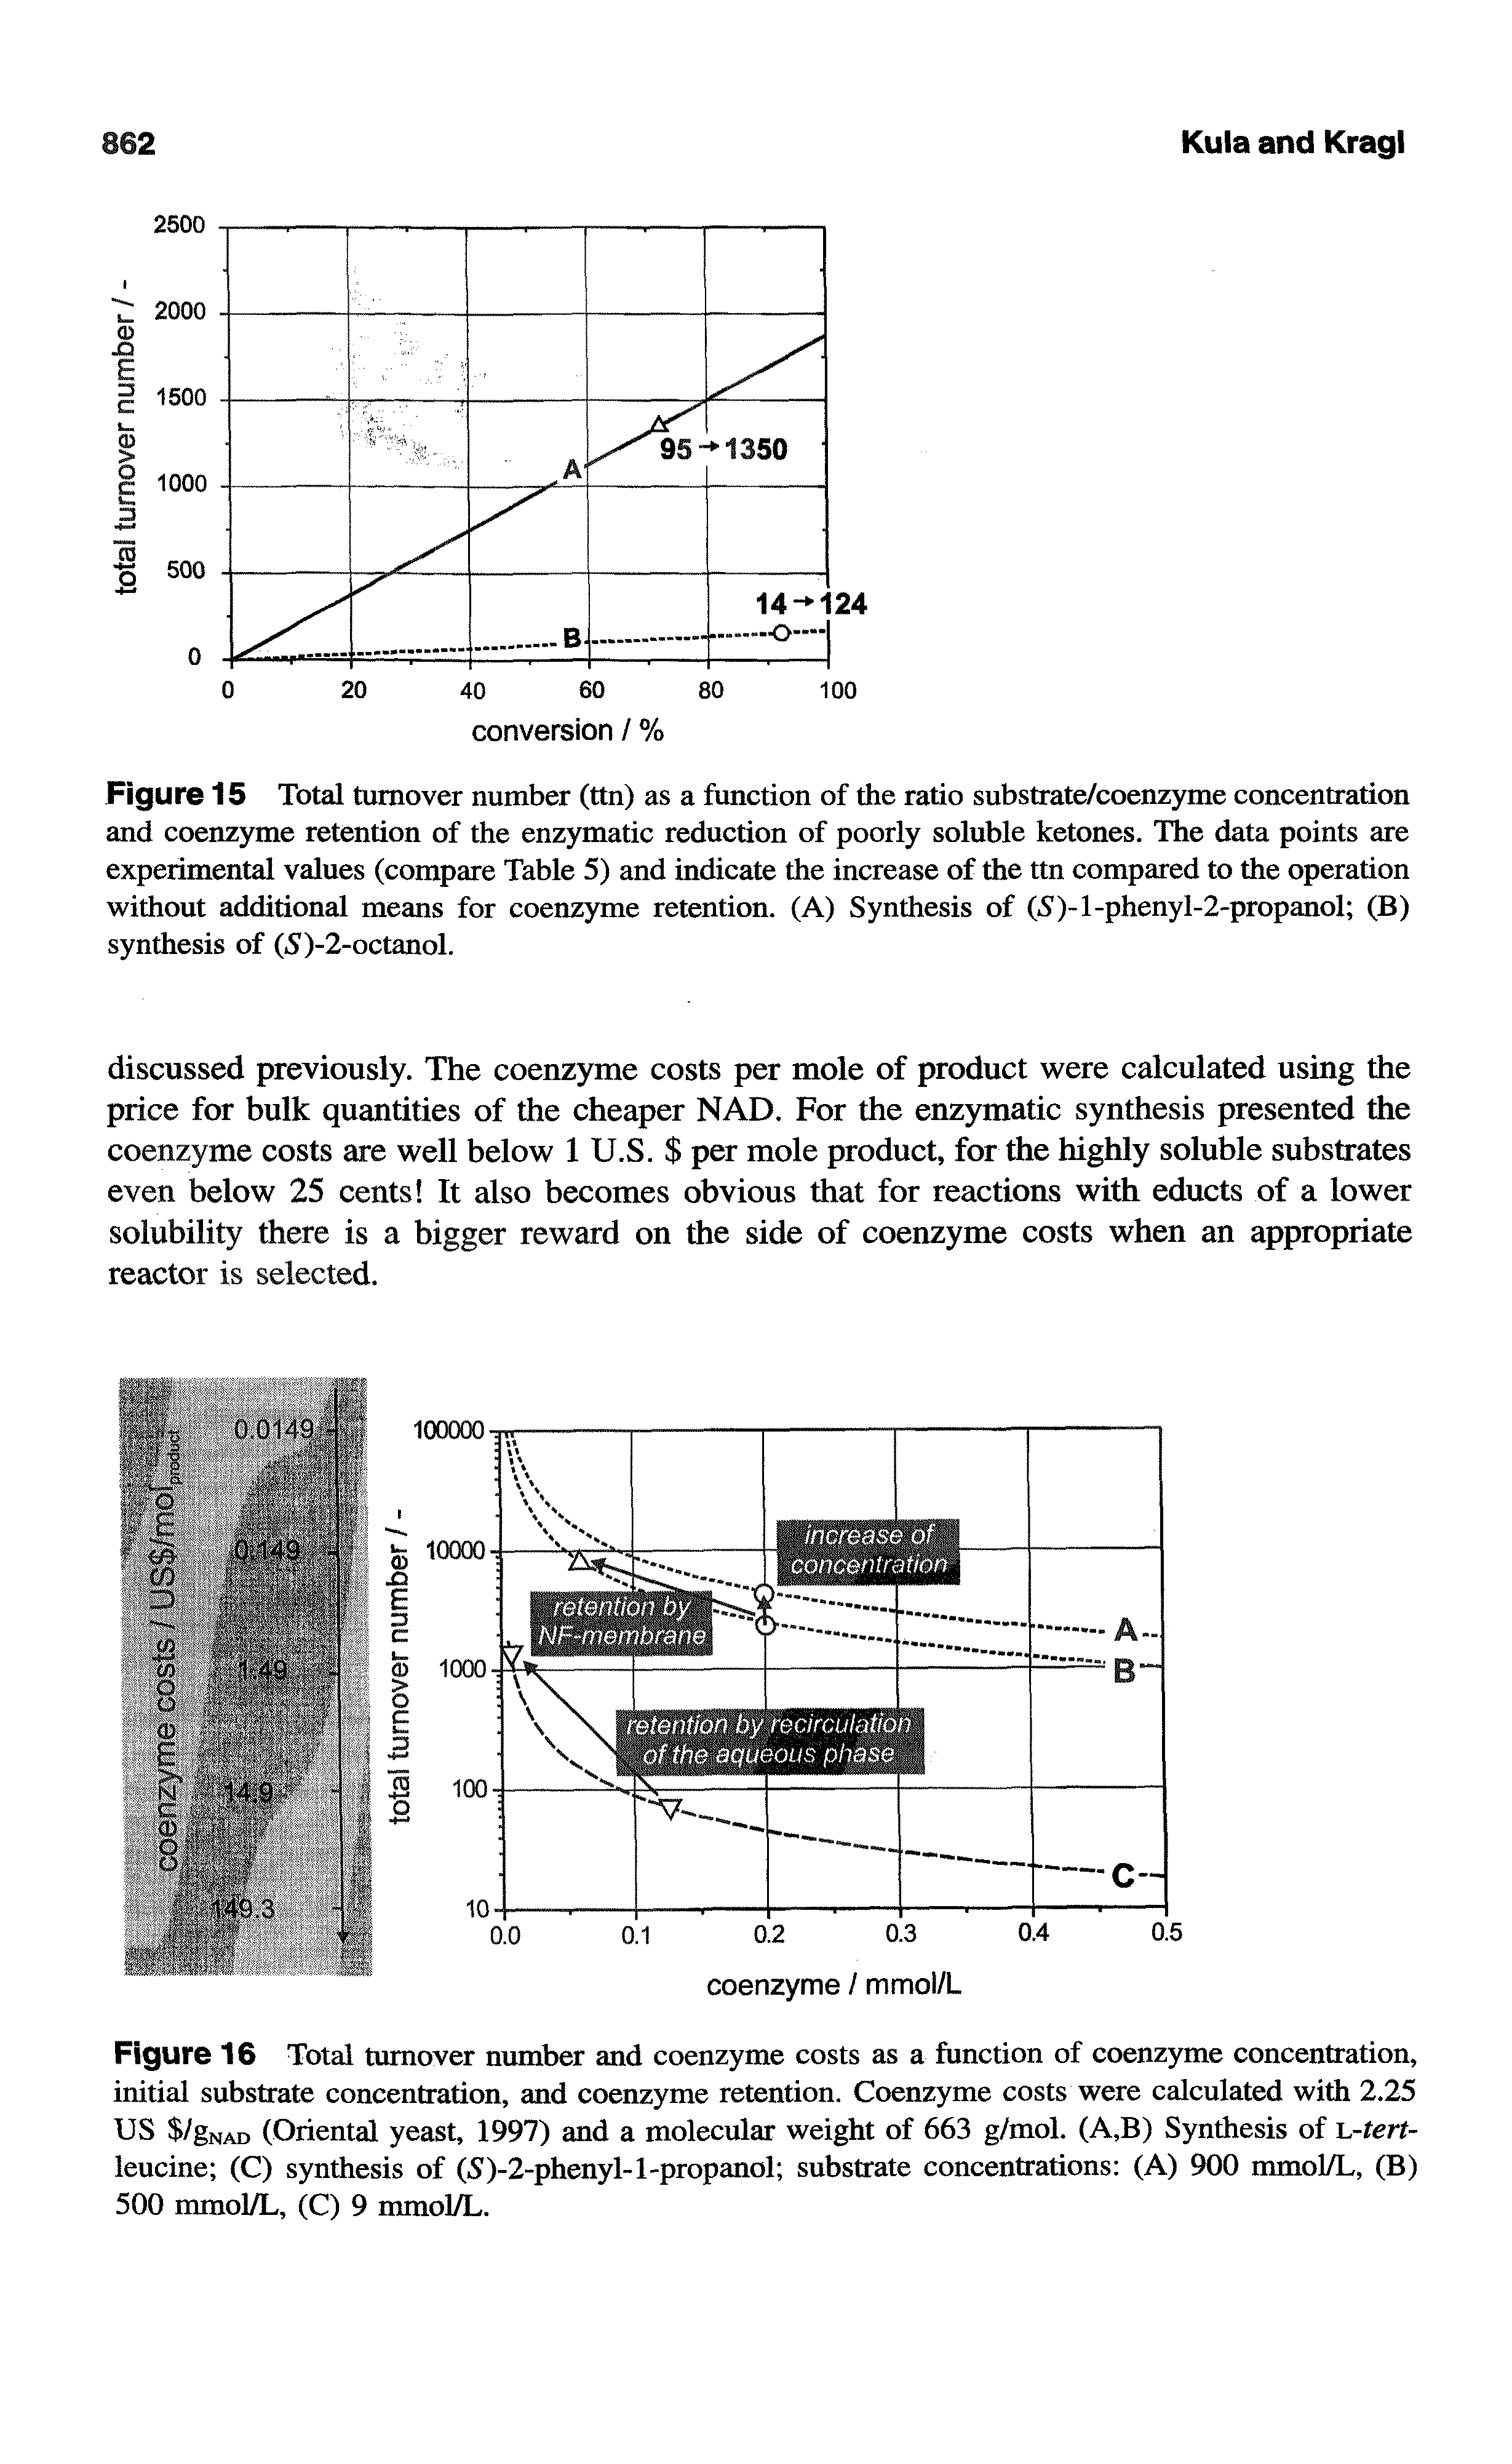 Figure 16 Total turnover number and coenzyme costs as a function of coenzyme concentration, initial substrate concentration, and coenzyme retention. Coenzyme costs were calculated with 2.25 US /gNAD (Oriental yeast, 1997) and a molecular weight of 663 g/mol. (A,B) Synthesis of L-fert-leucine (C) synthesis of (5)-2-phenyl-l-propanol substrate concentrations (A) 900 mmol/L, (B) 500 mmol/L, (C) 9 mmol/L.